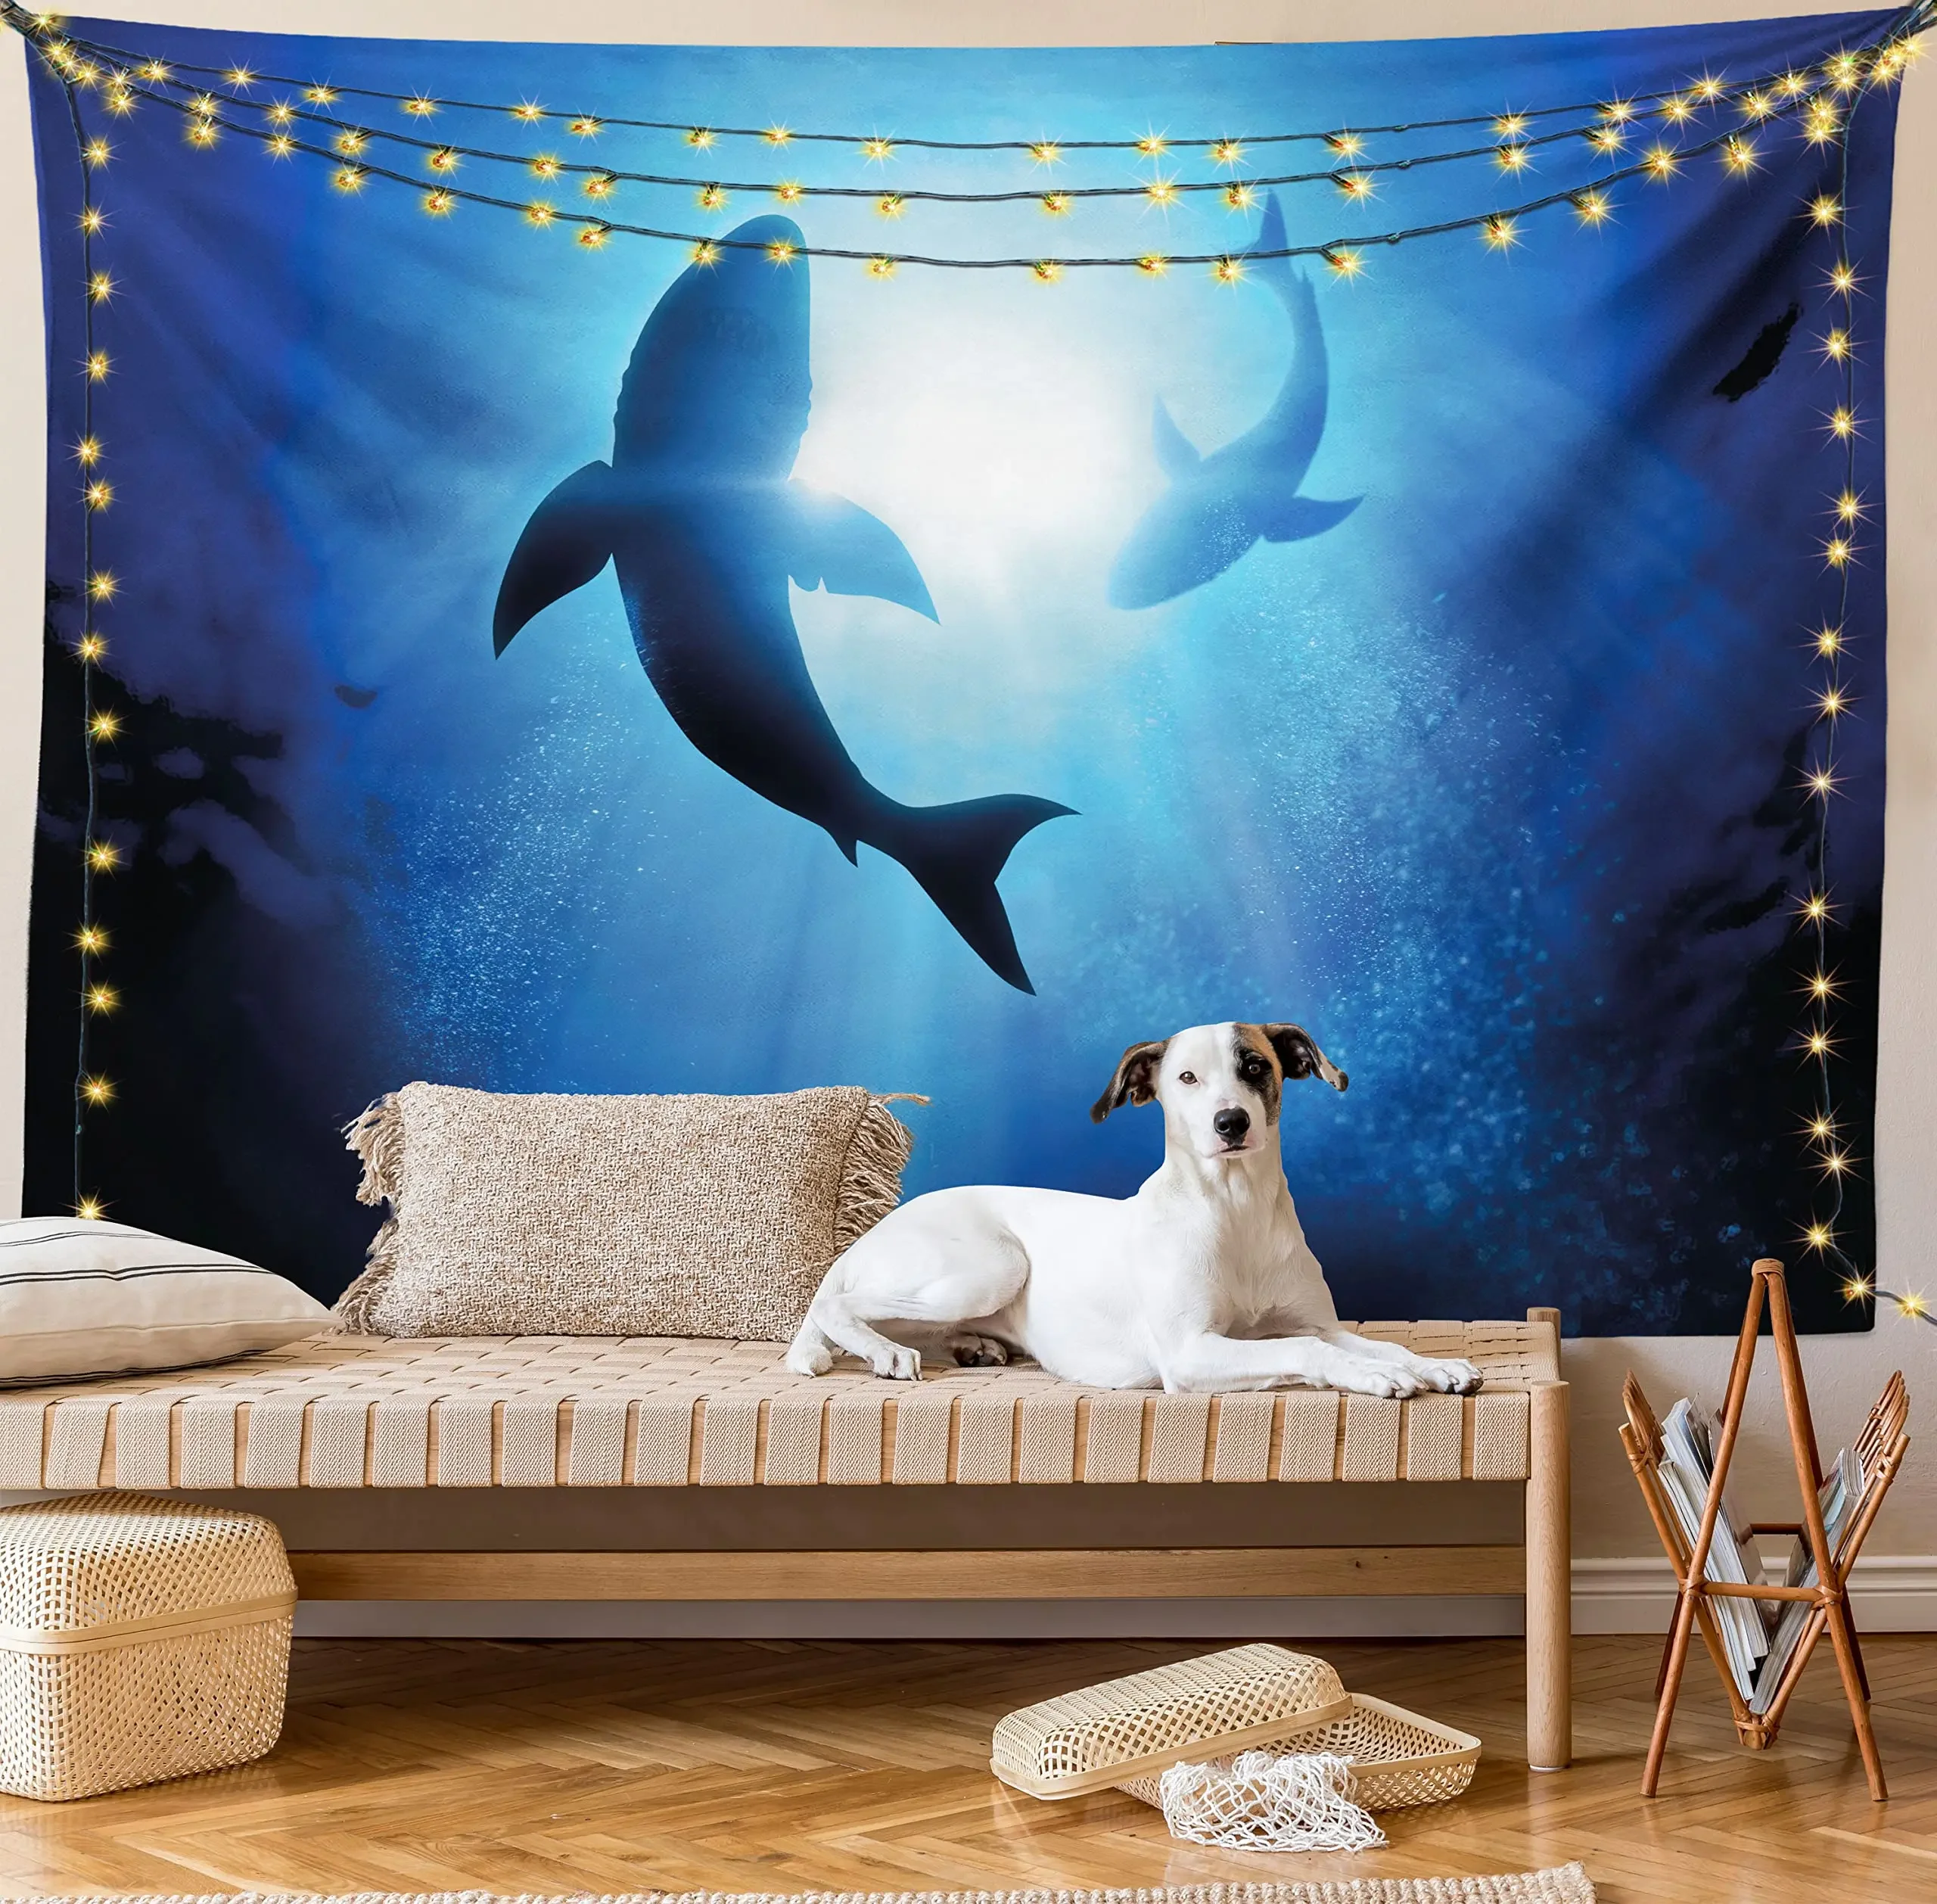 

Shark Tapestry,Underwater World Fish Silhouettes Circling In The Sea Surreal Ocean Life Wall Hanging for Bedroom Livingroom Dorm